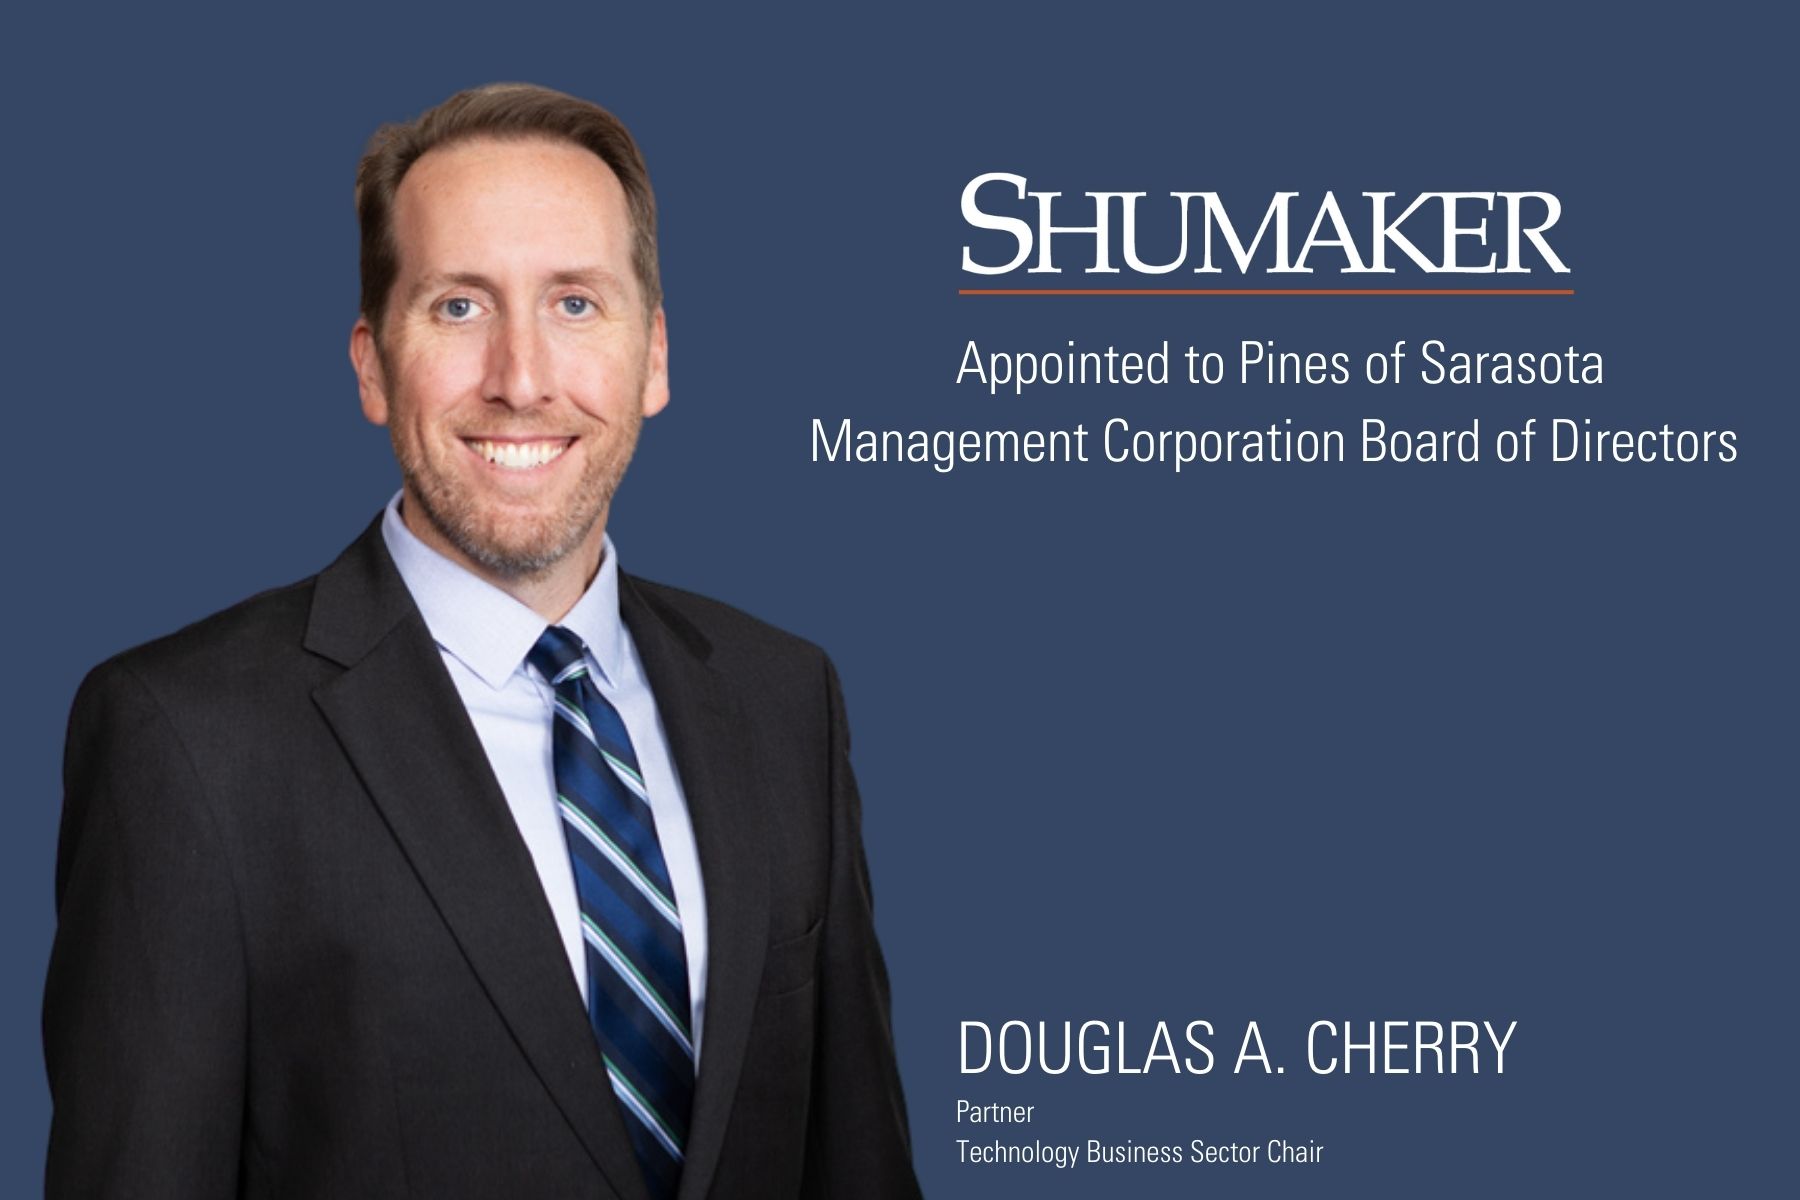 Shumaker Lawyer Appointed to Pines of Sarasota Management Corporation Board of Directors